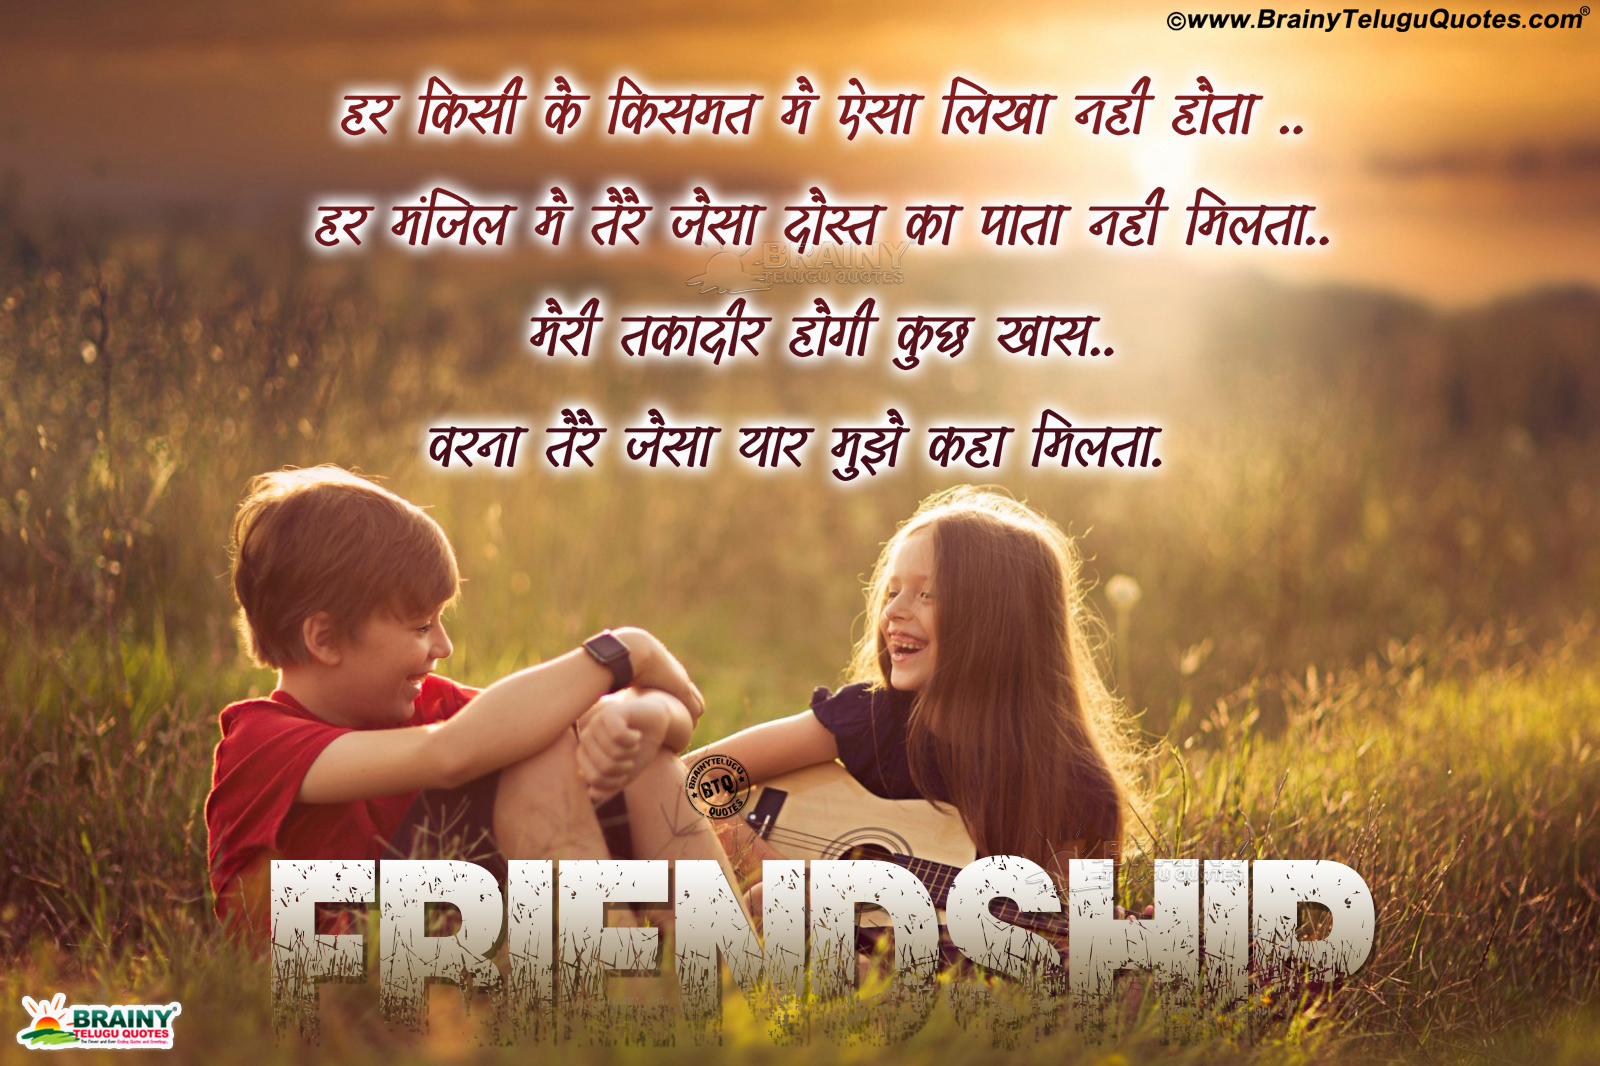 Best Friendship Quotes In Hindi-Inspirational Hindi Dosti Shayari With Cute Friends Hd Wallpaper | Brainyteluguquotes.comtelugu Quotes|English Quotes|Hindi Quotes|Tamil Quotes|Greetings